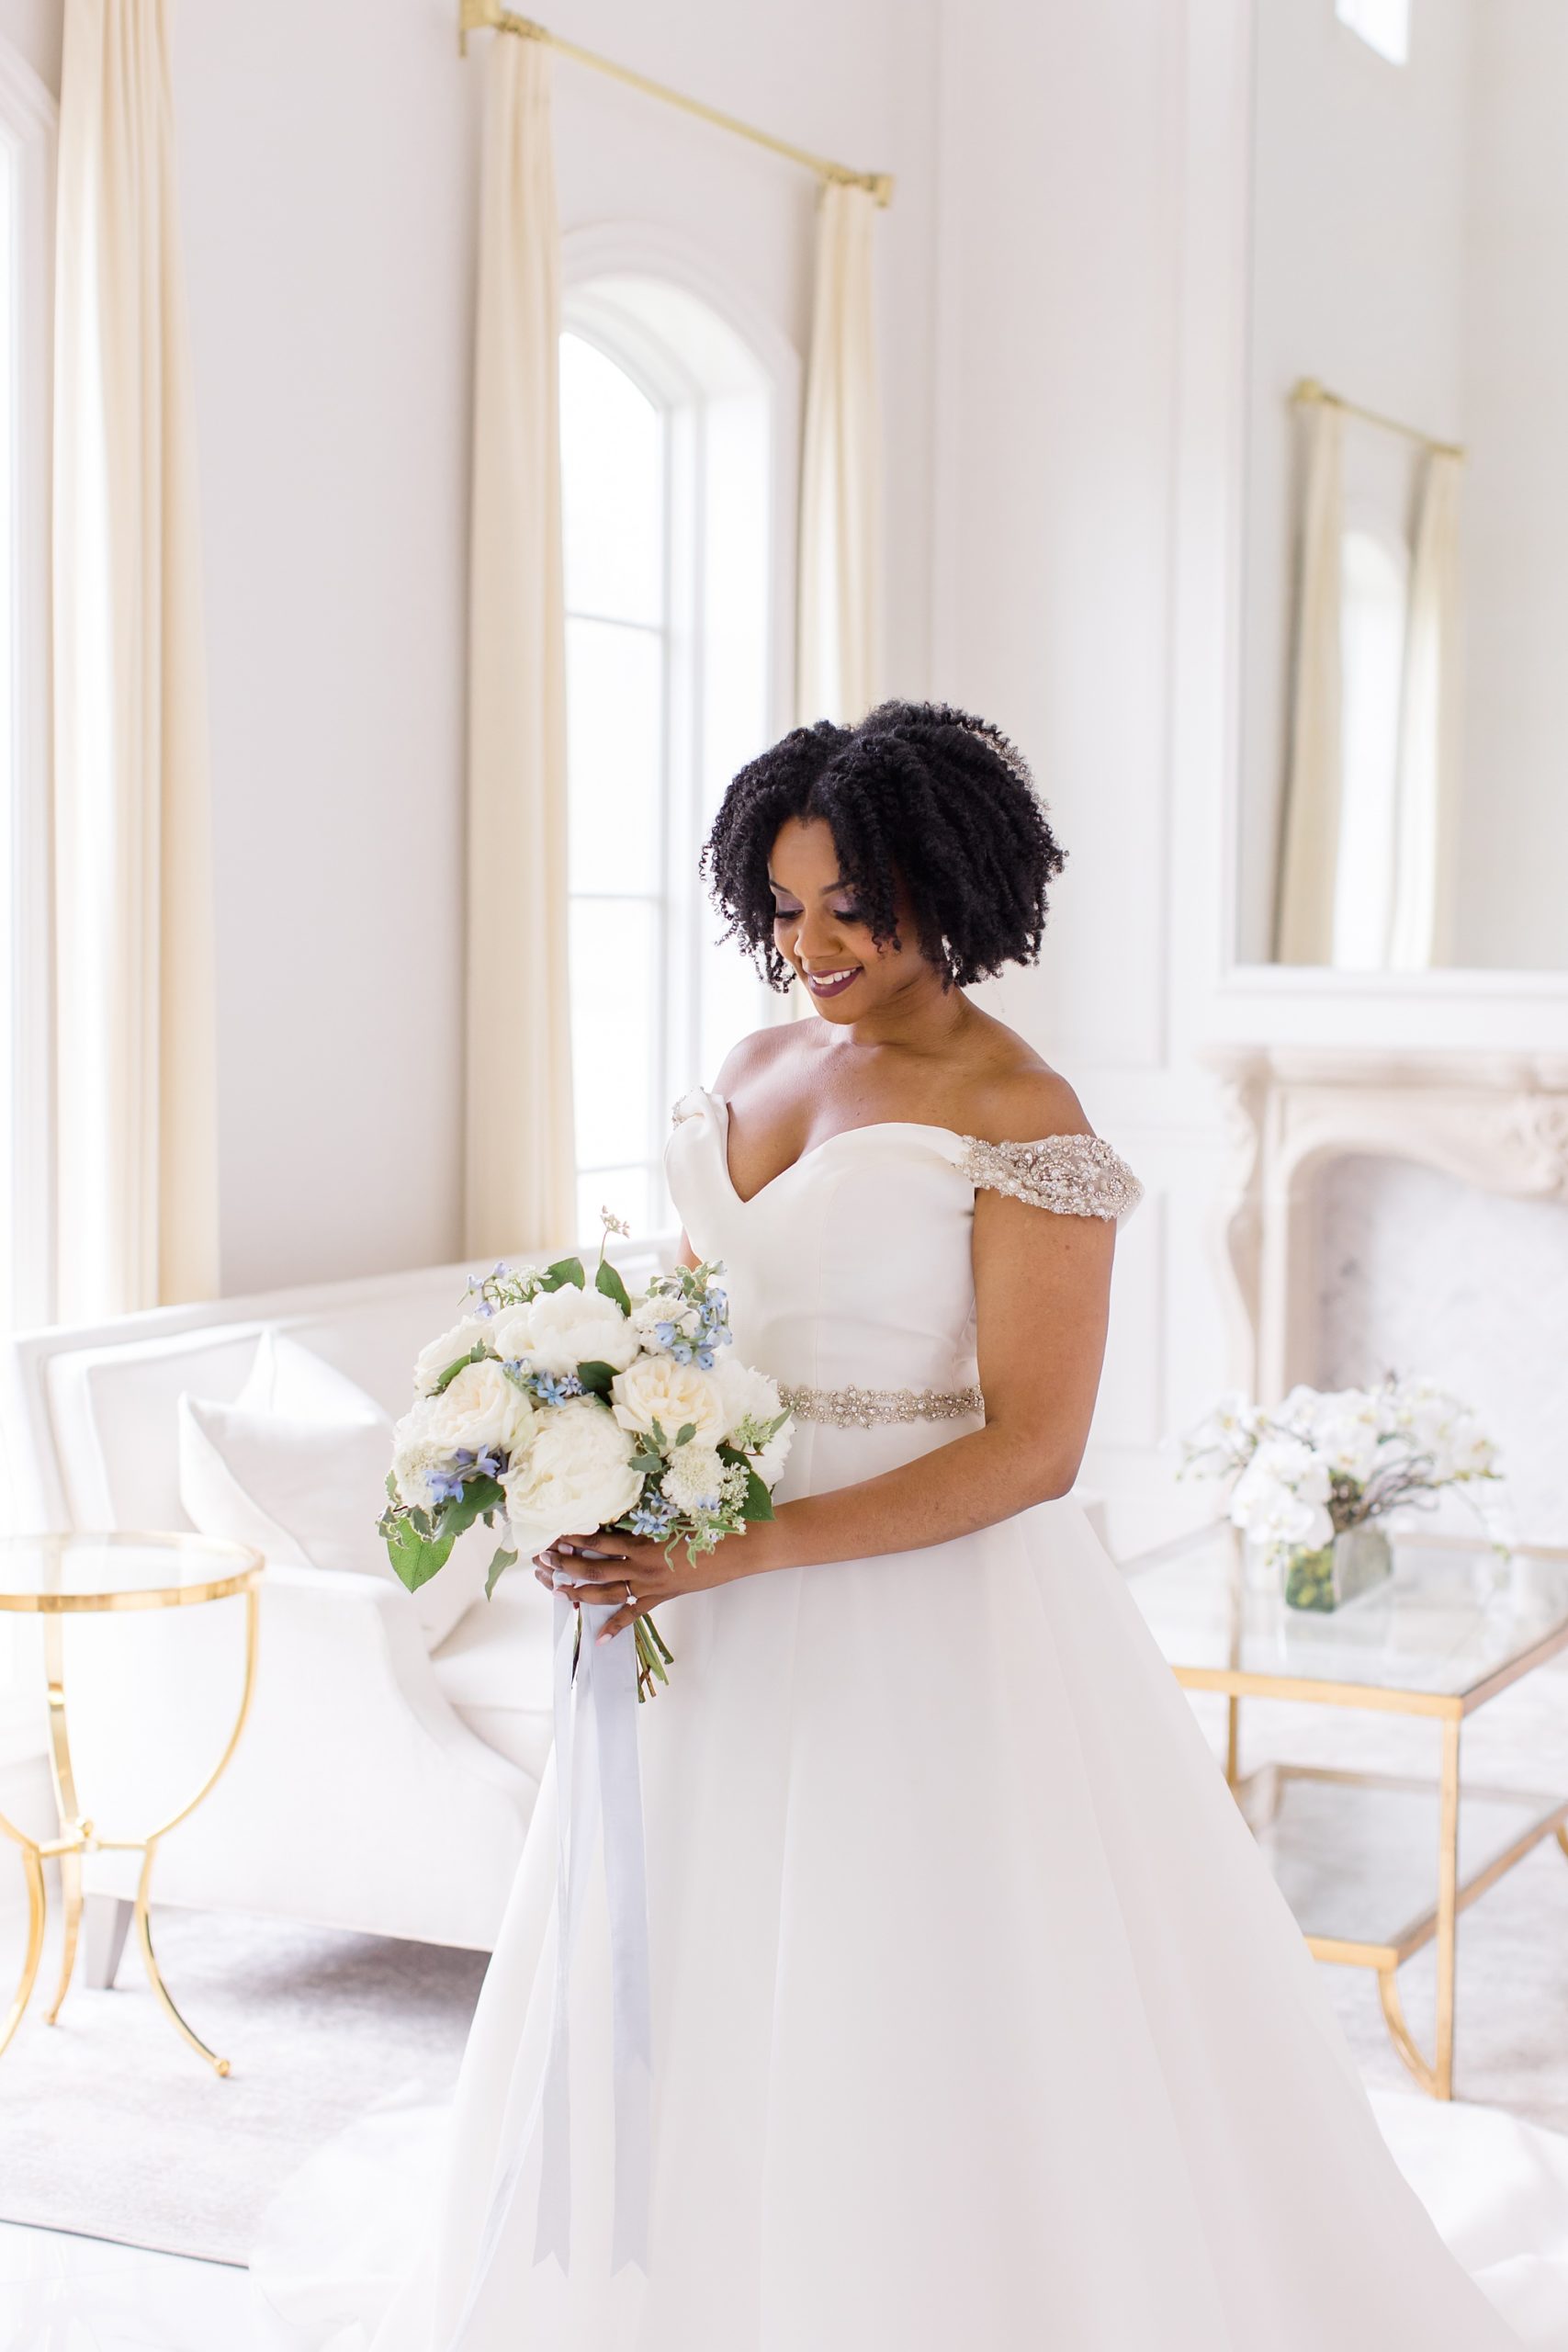 bride looks down at bouquet during portraits in bridal suite